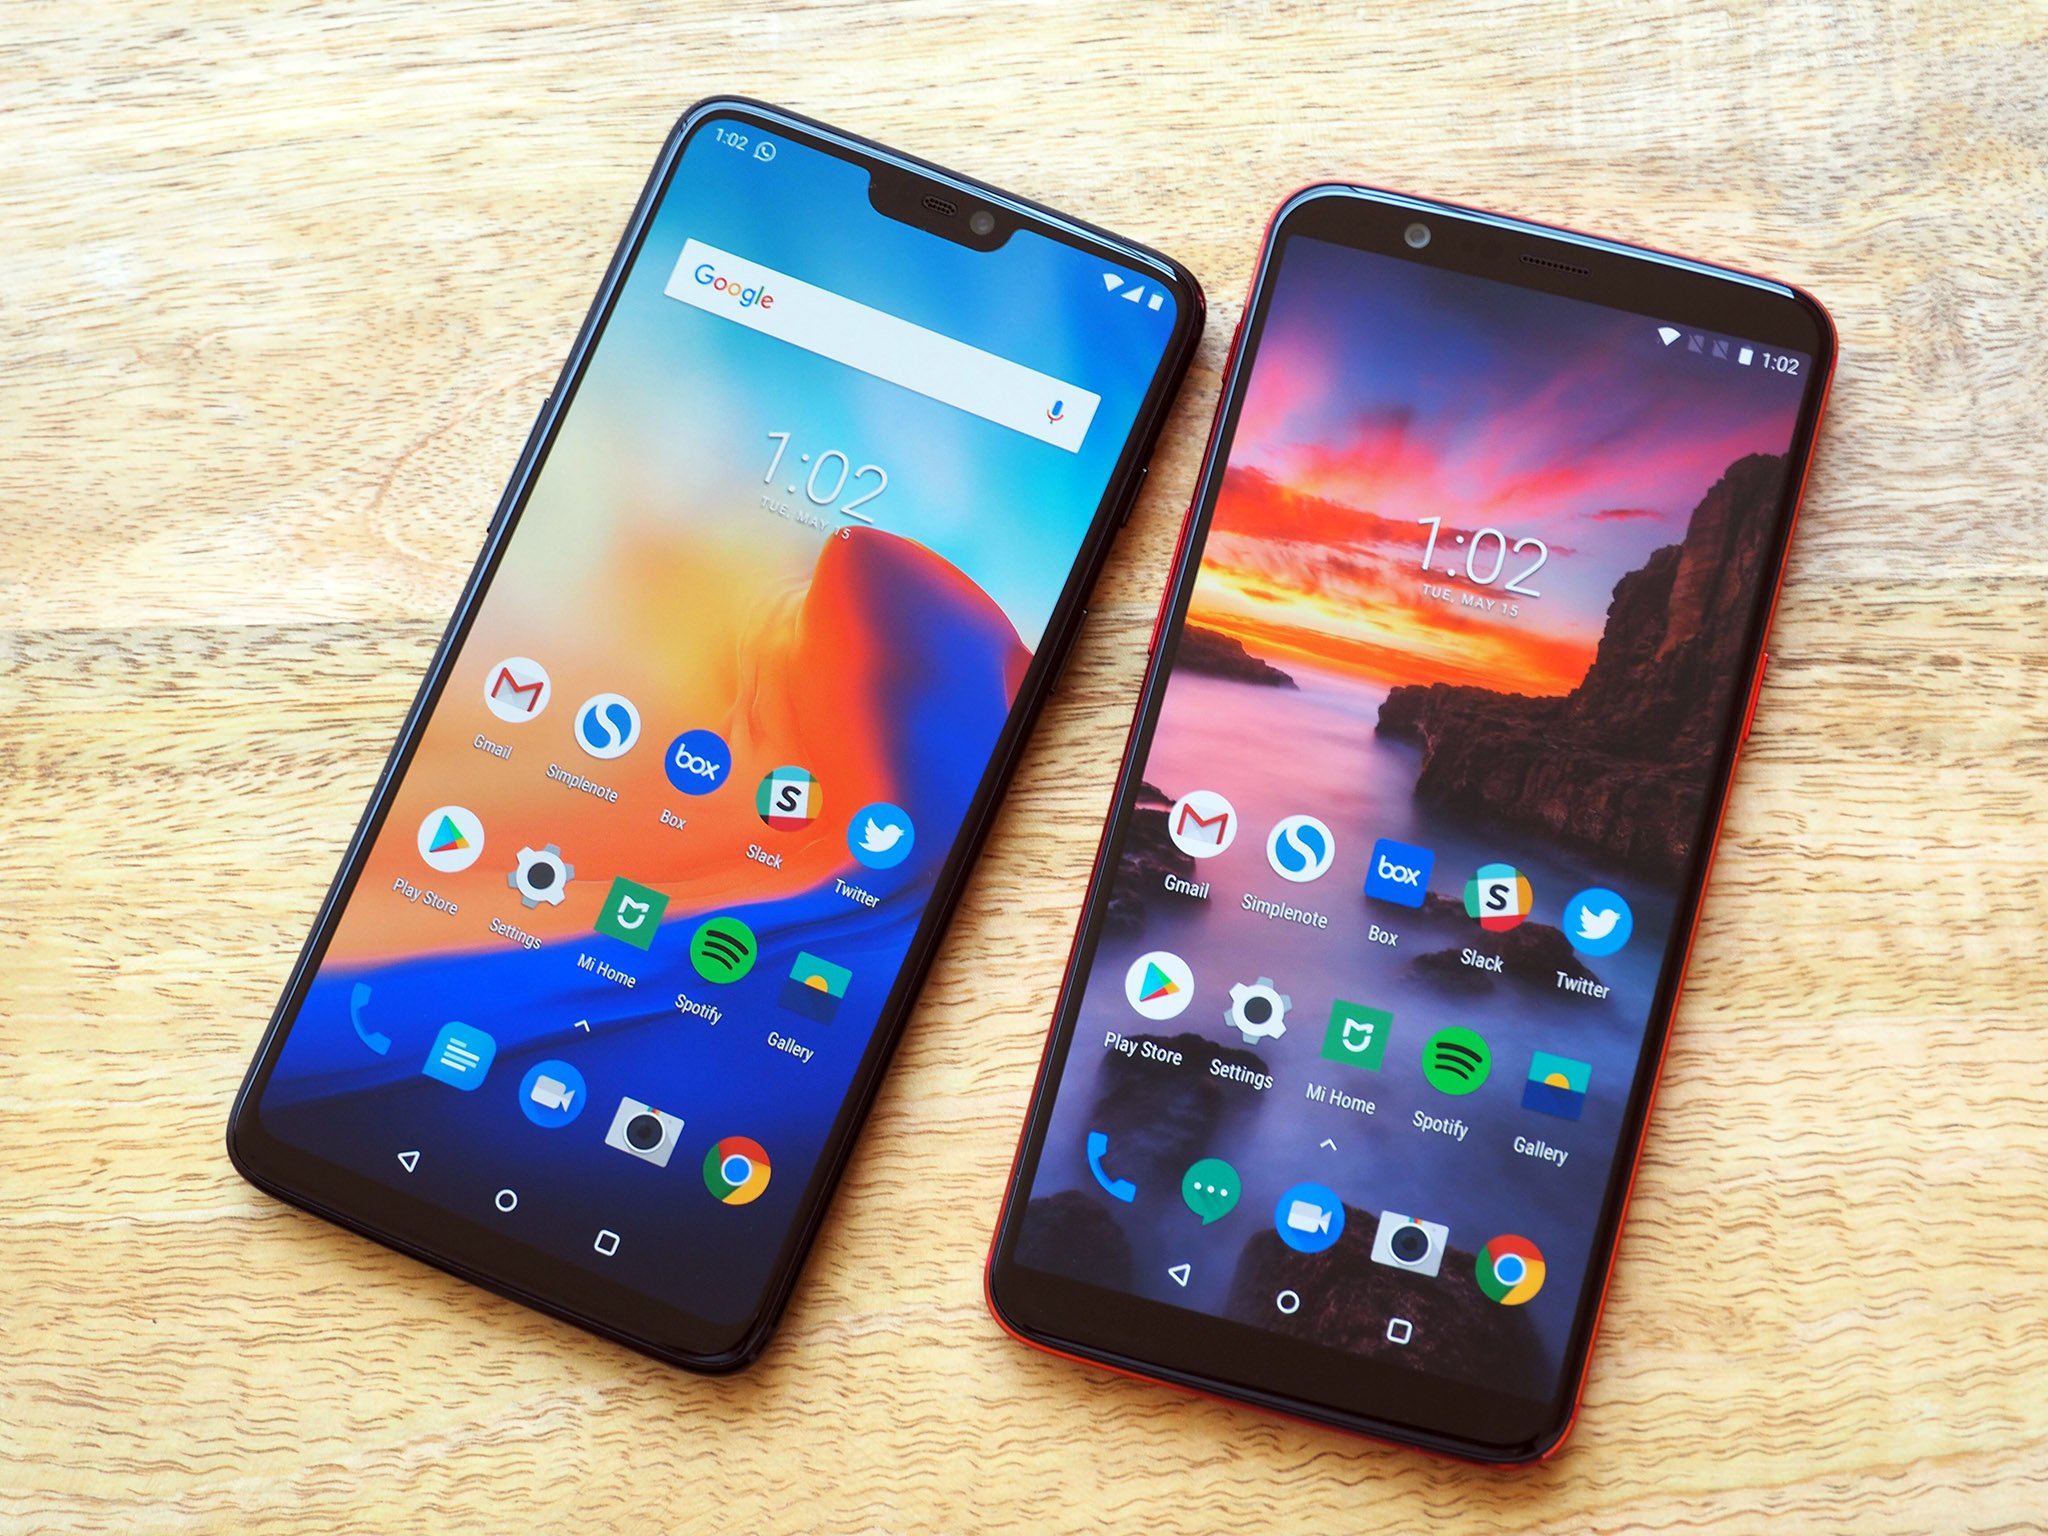 Comparison between oneplus 6 and oneplus 6t